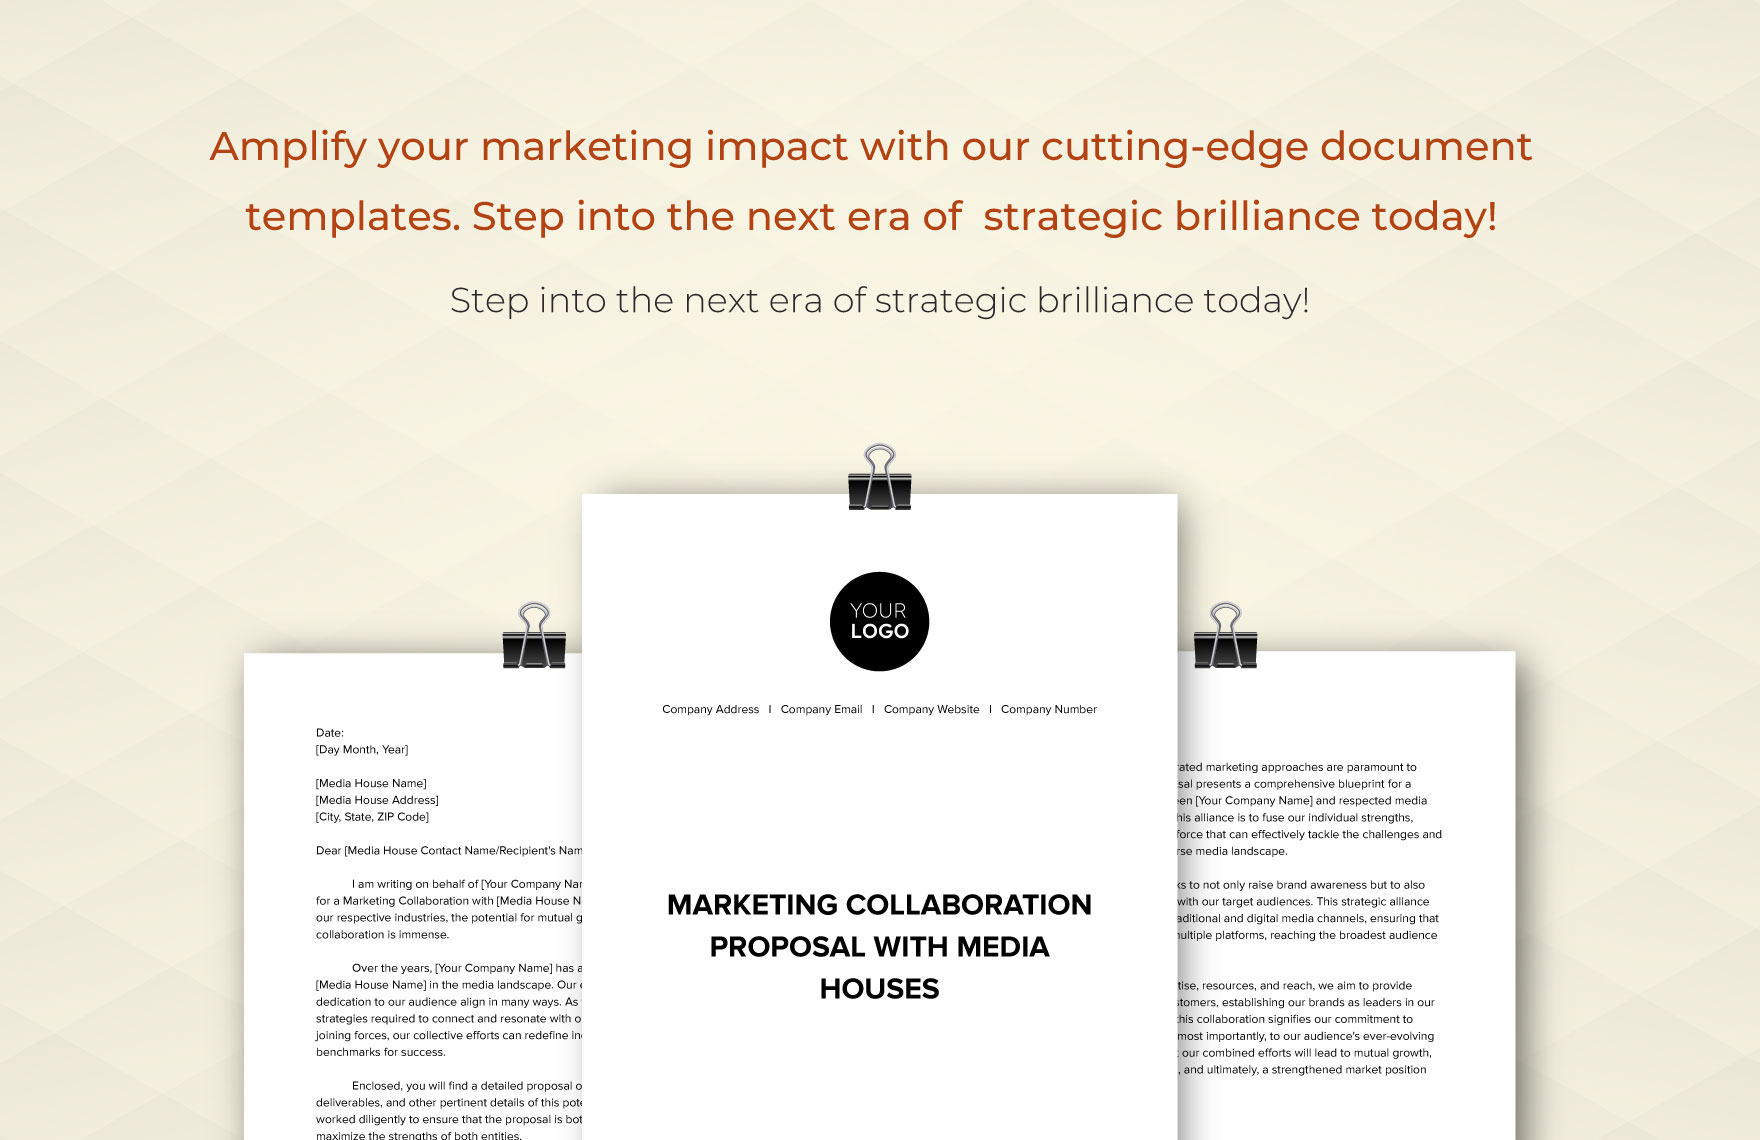 Marketing Collaboration Proposal with Media Houses Template